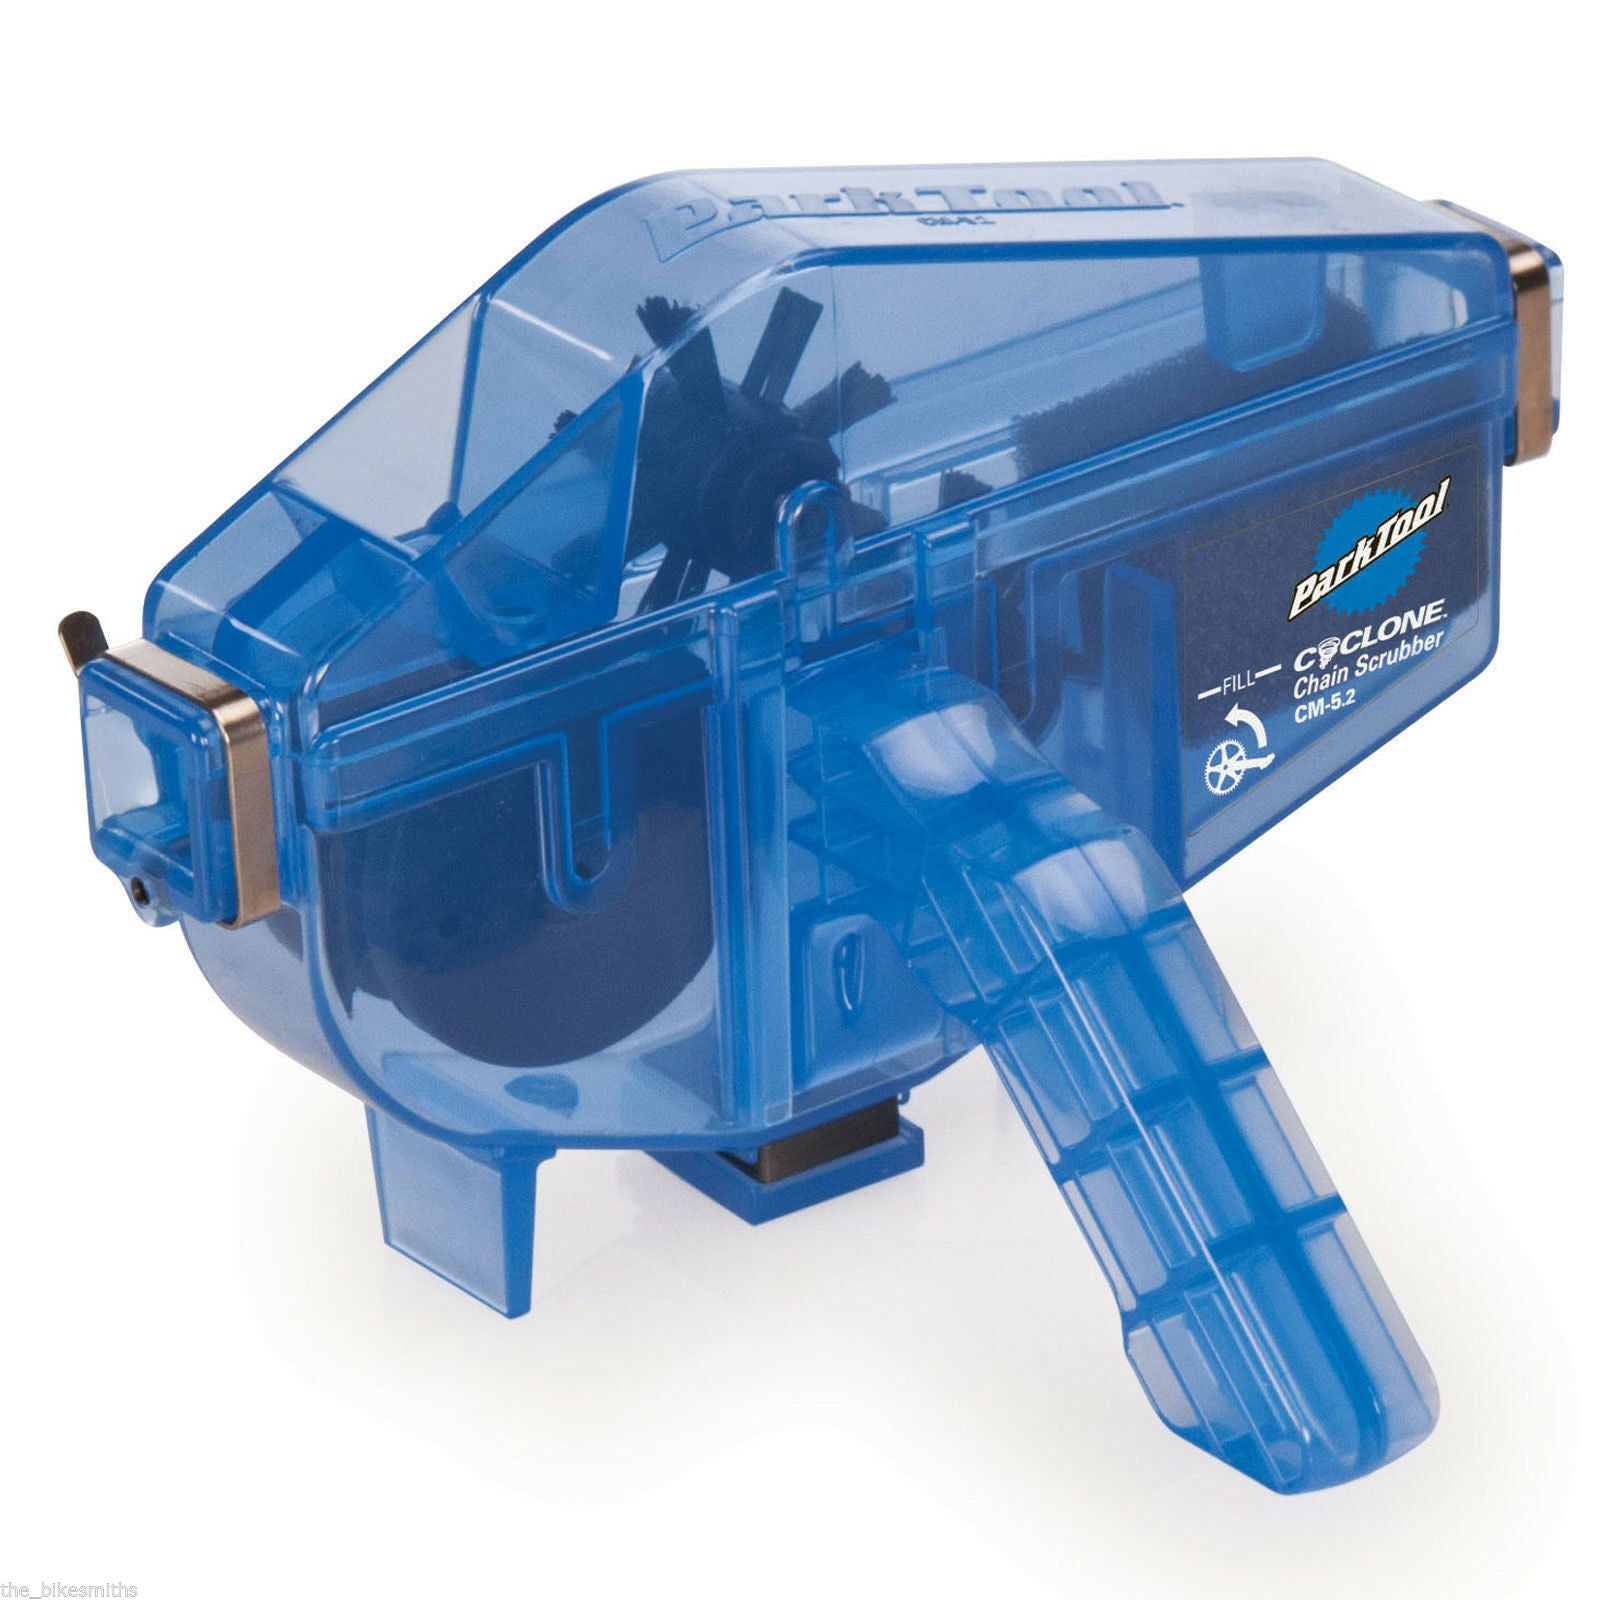 Park Tool CM-5.3 Cyclone Chain Cleaner - The Bikesmiths